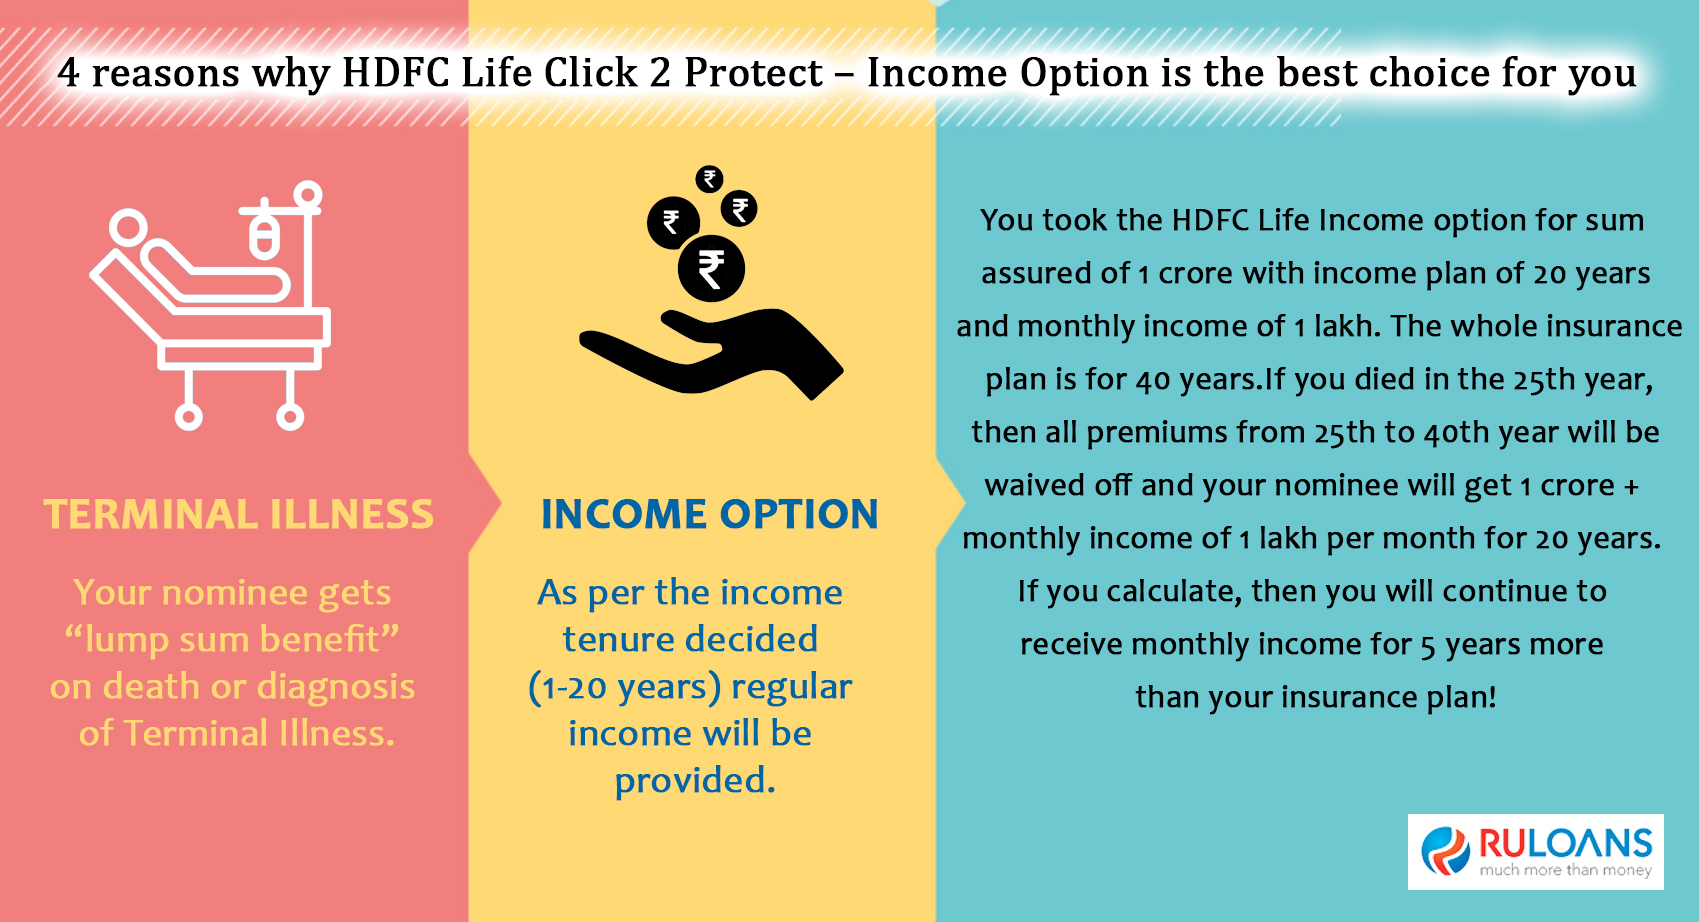 HDFC Life Click 2 Protect – Income Option 